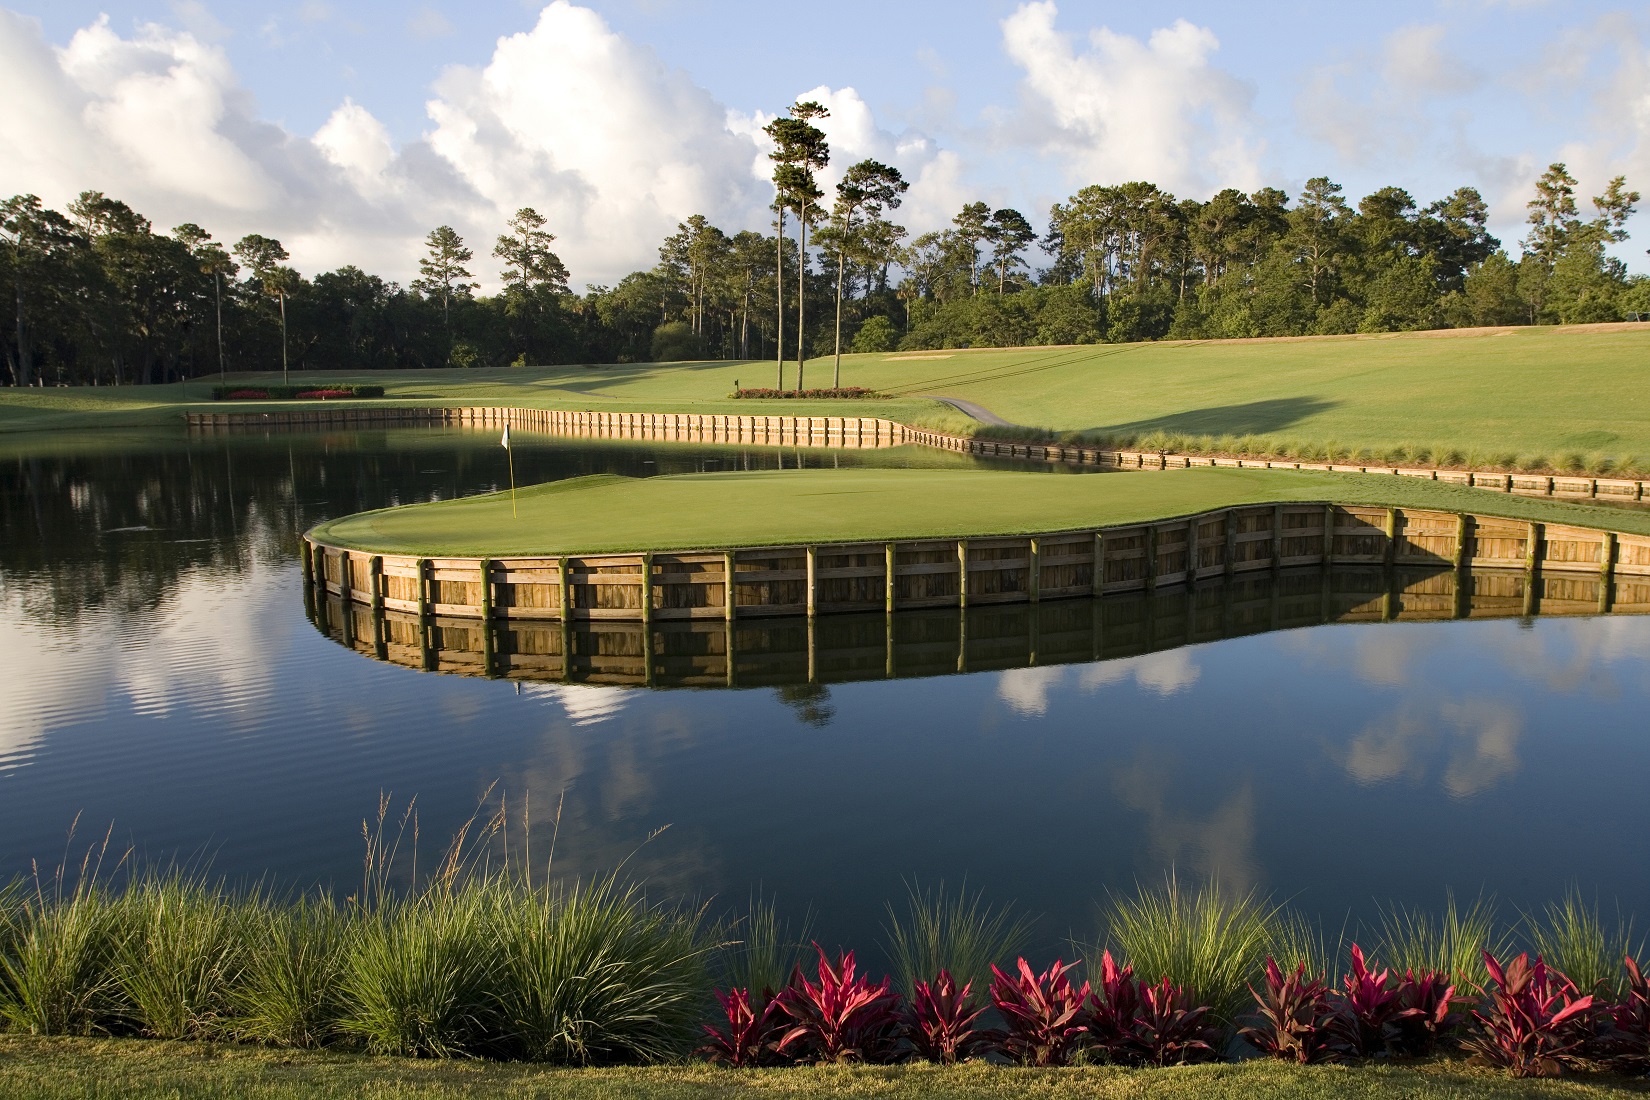 The golf greats have experienced the famous Hole 17 at TPC Sawgrass